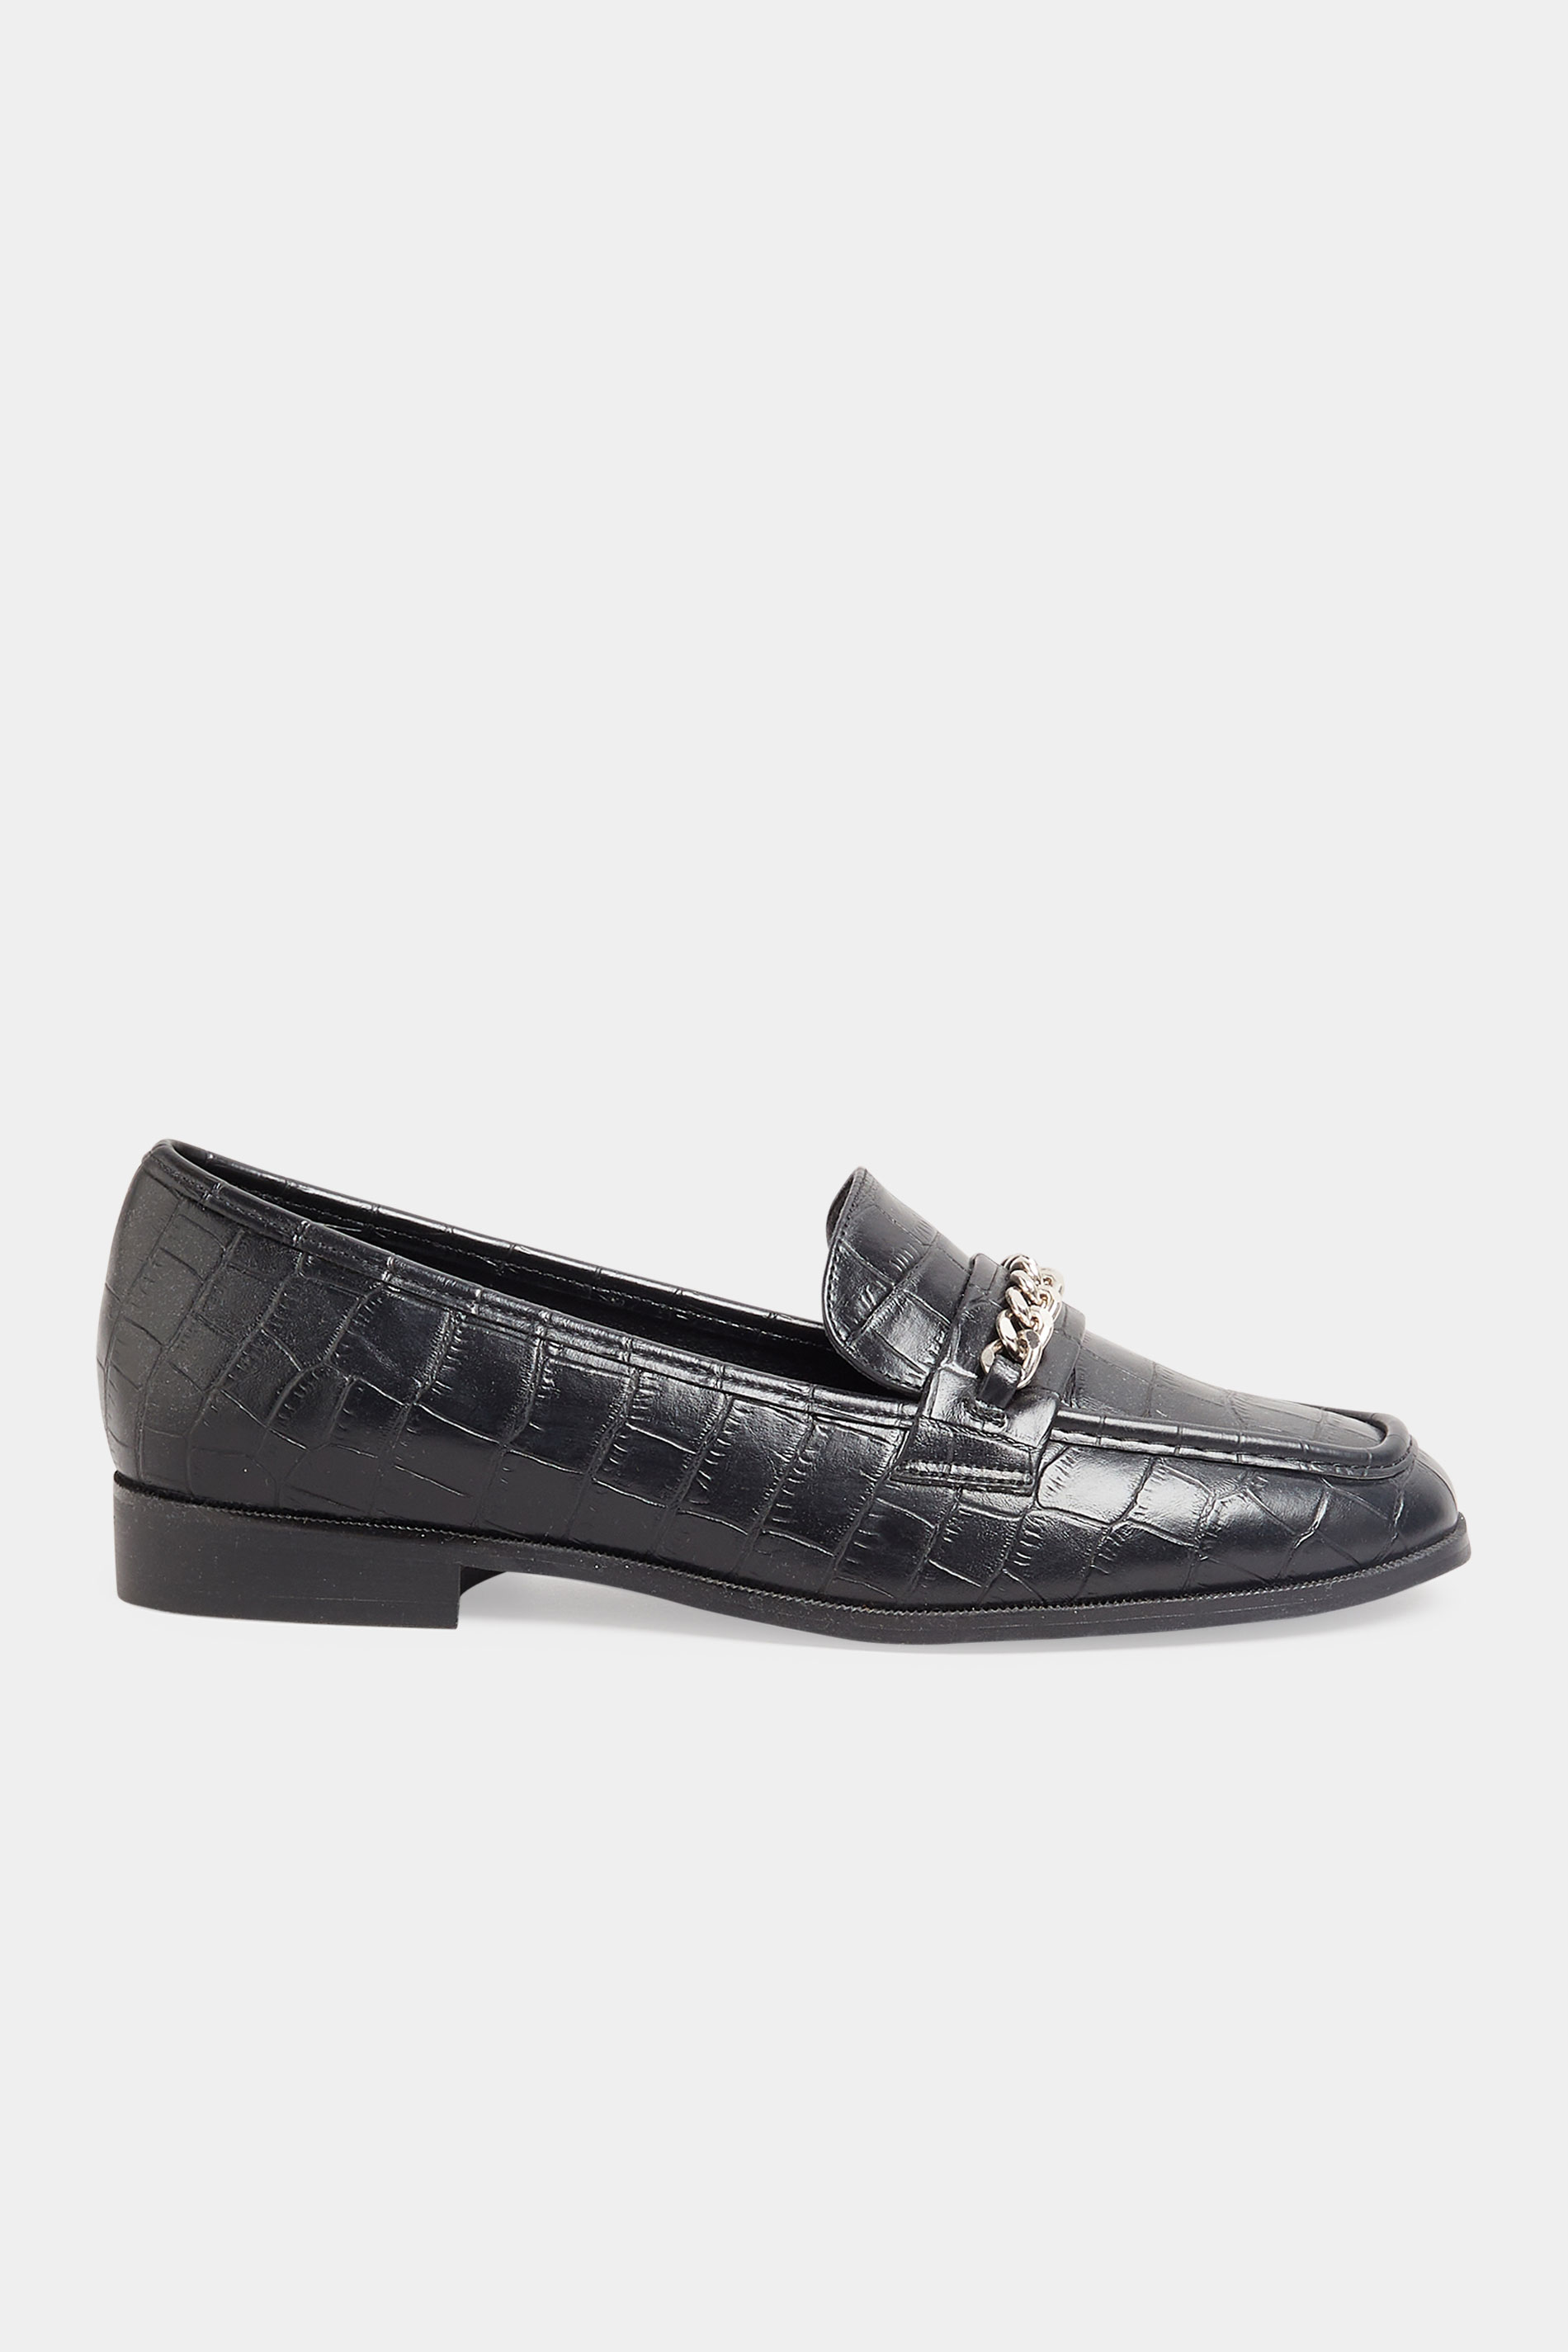 LTS Black Croc Chain Detail Loafers In Standard D Fit | Long Tall Sally